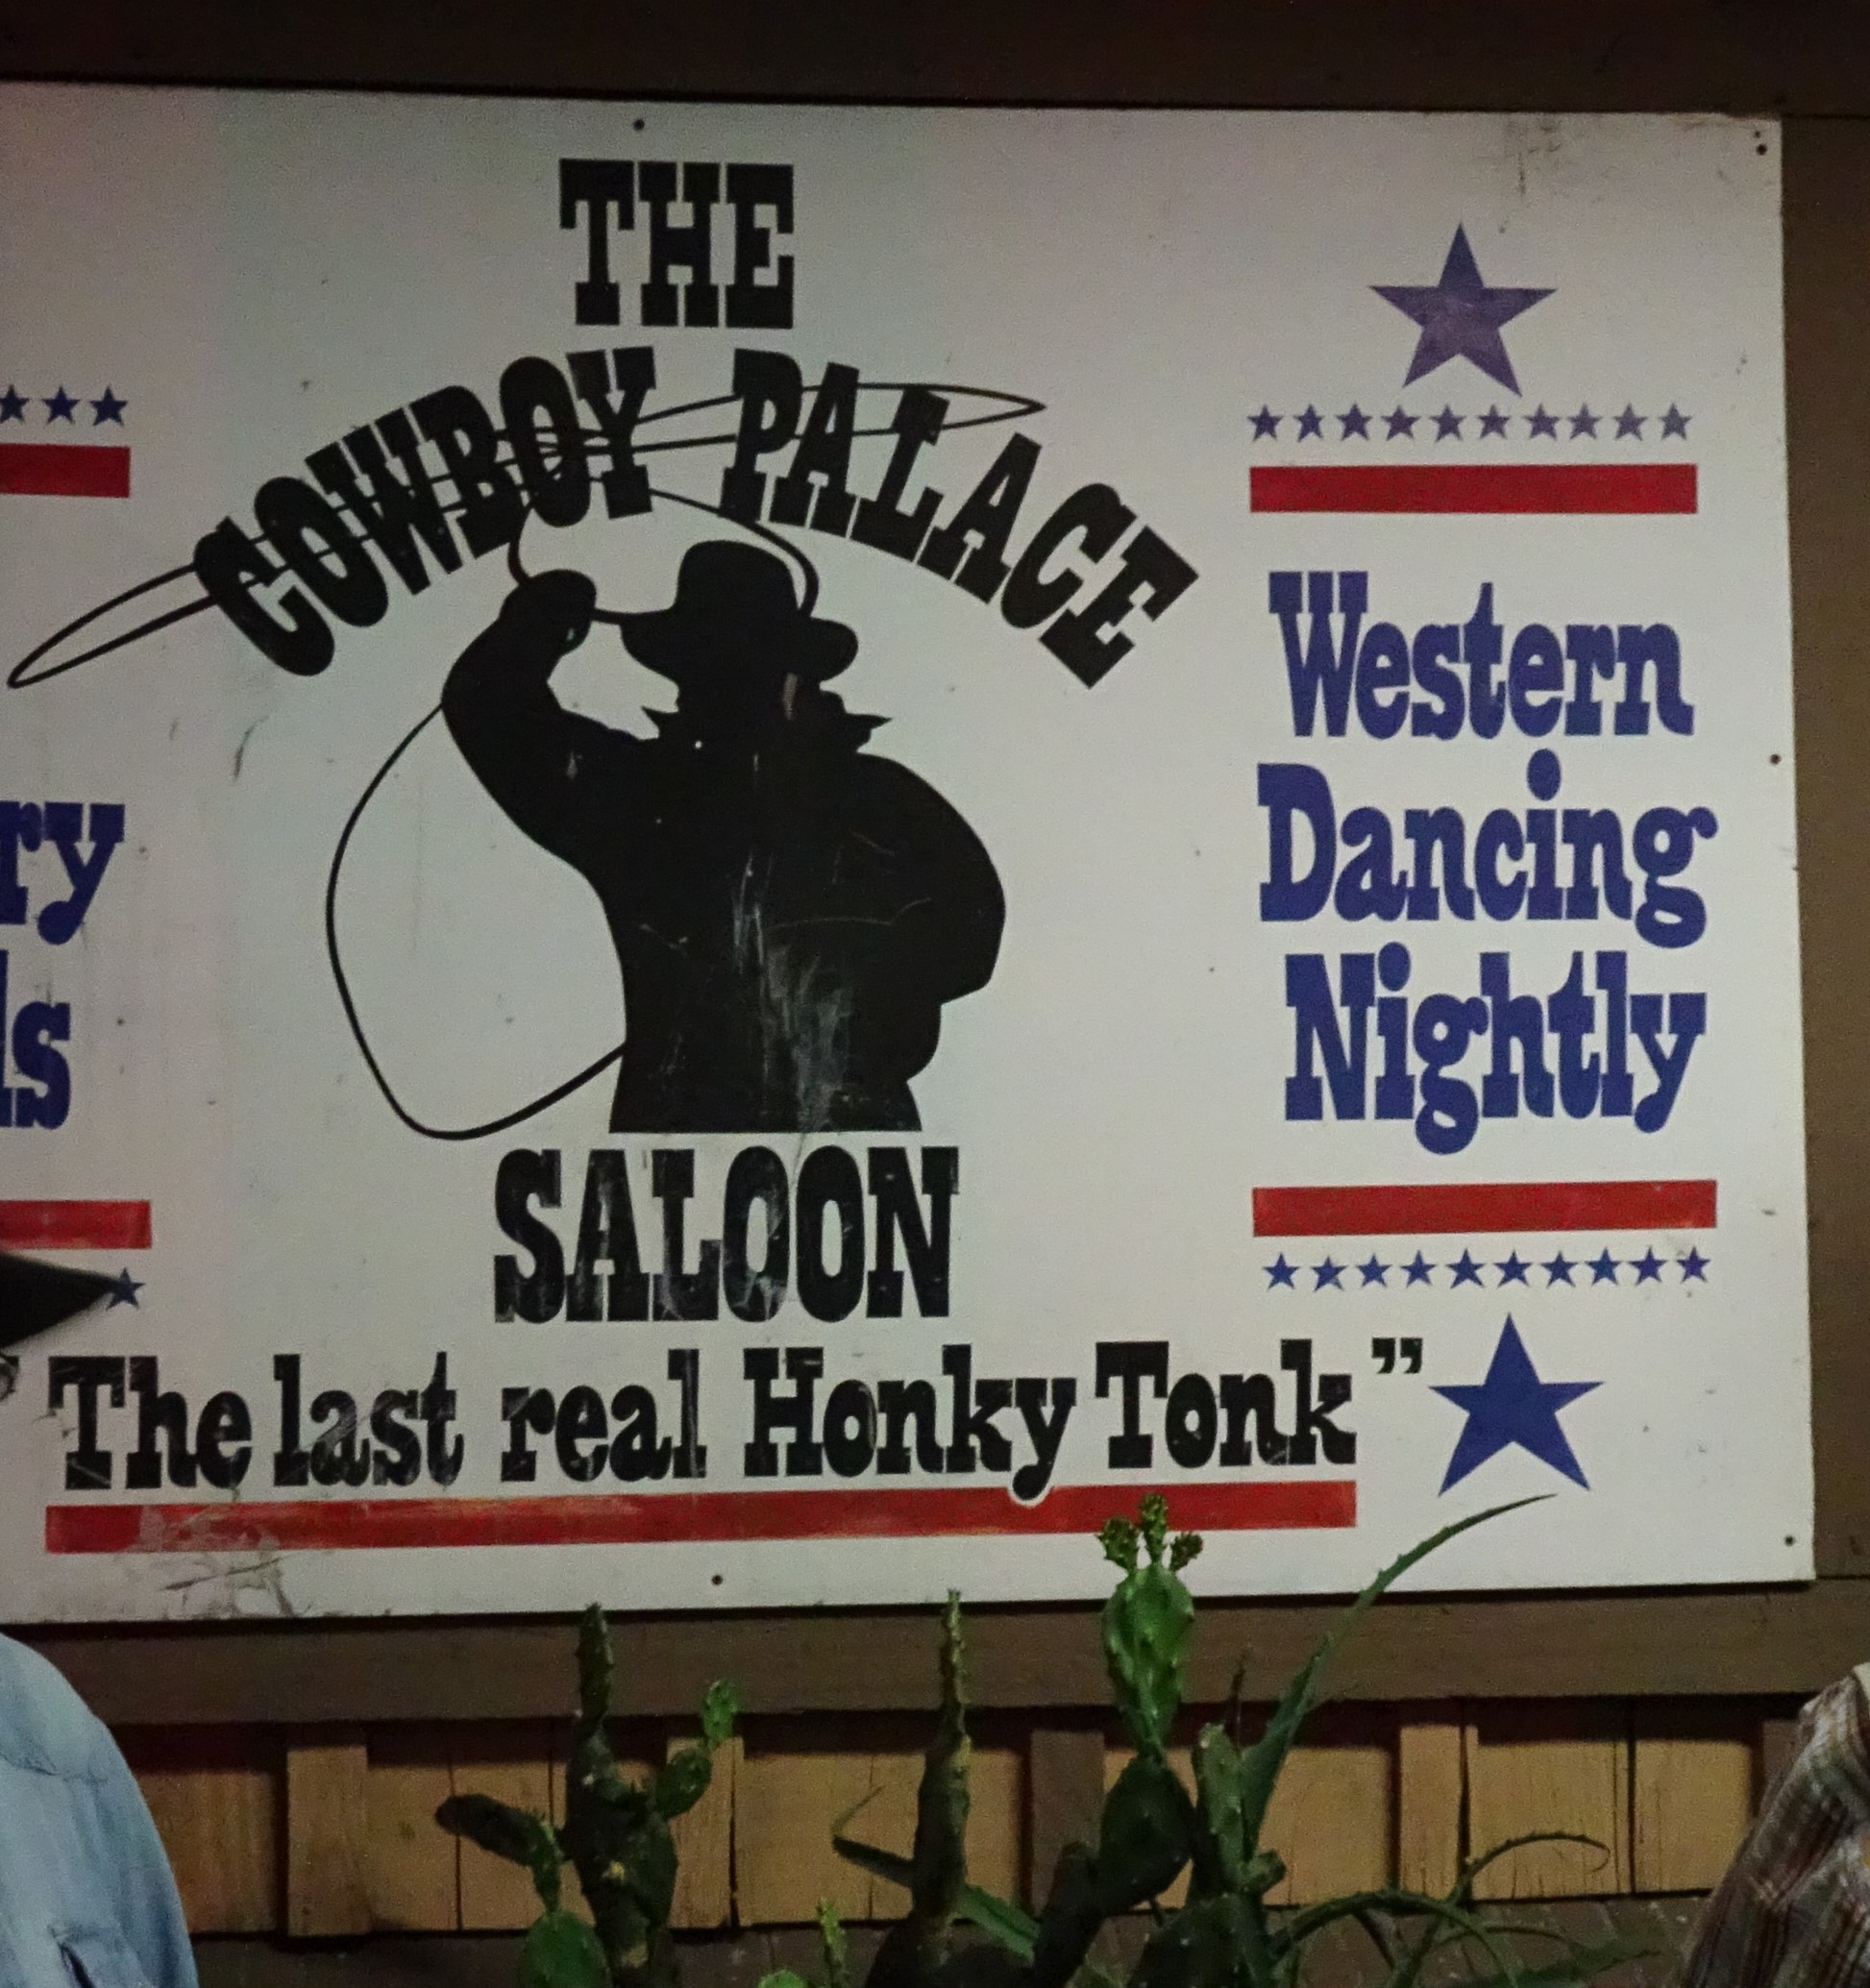 The Cowboy Palace Saloon in Los Angeles